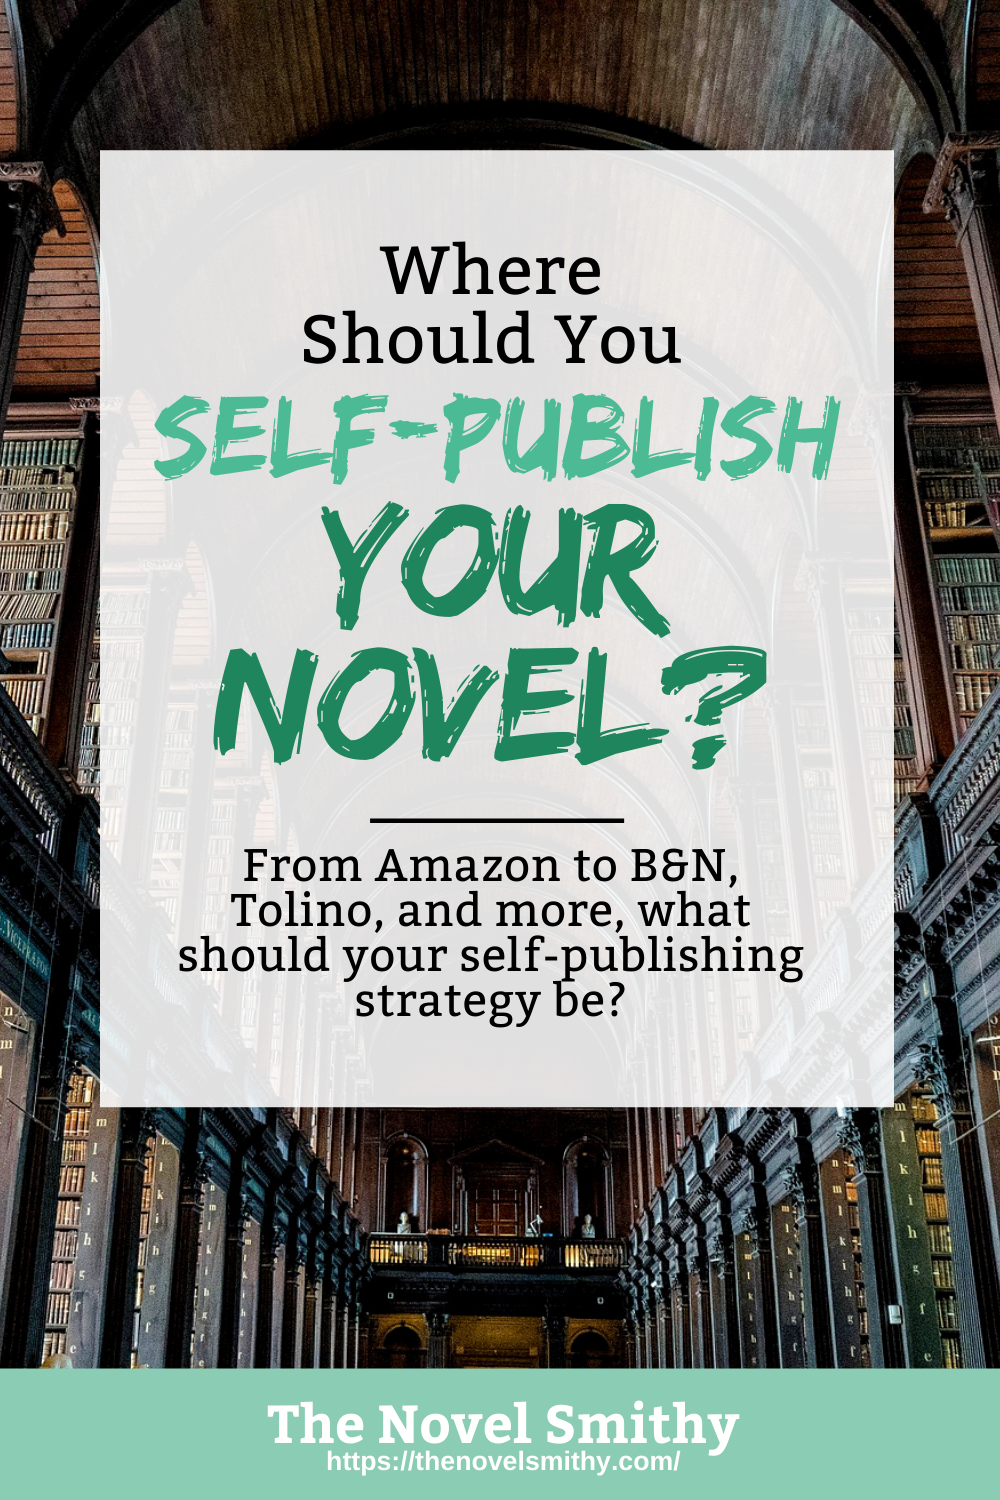 Going Beyond KDP: Where Should You Publish Your Novel?